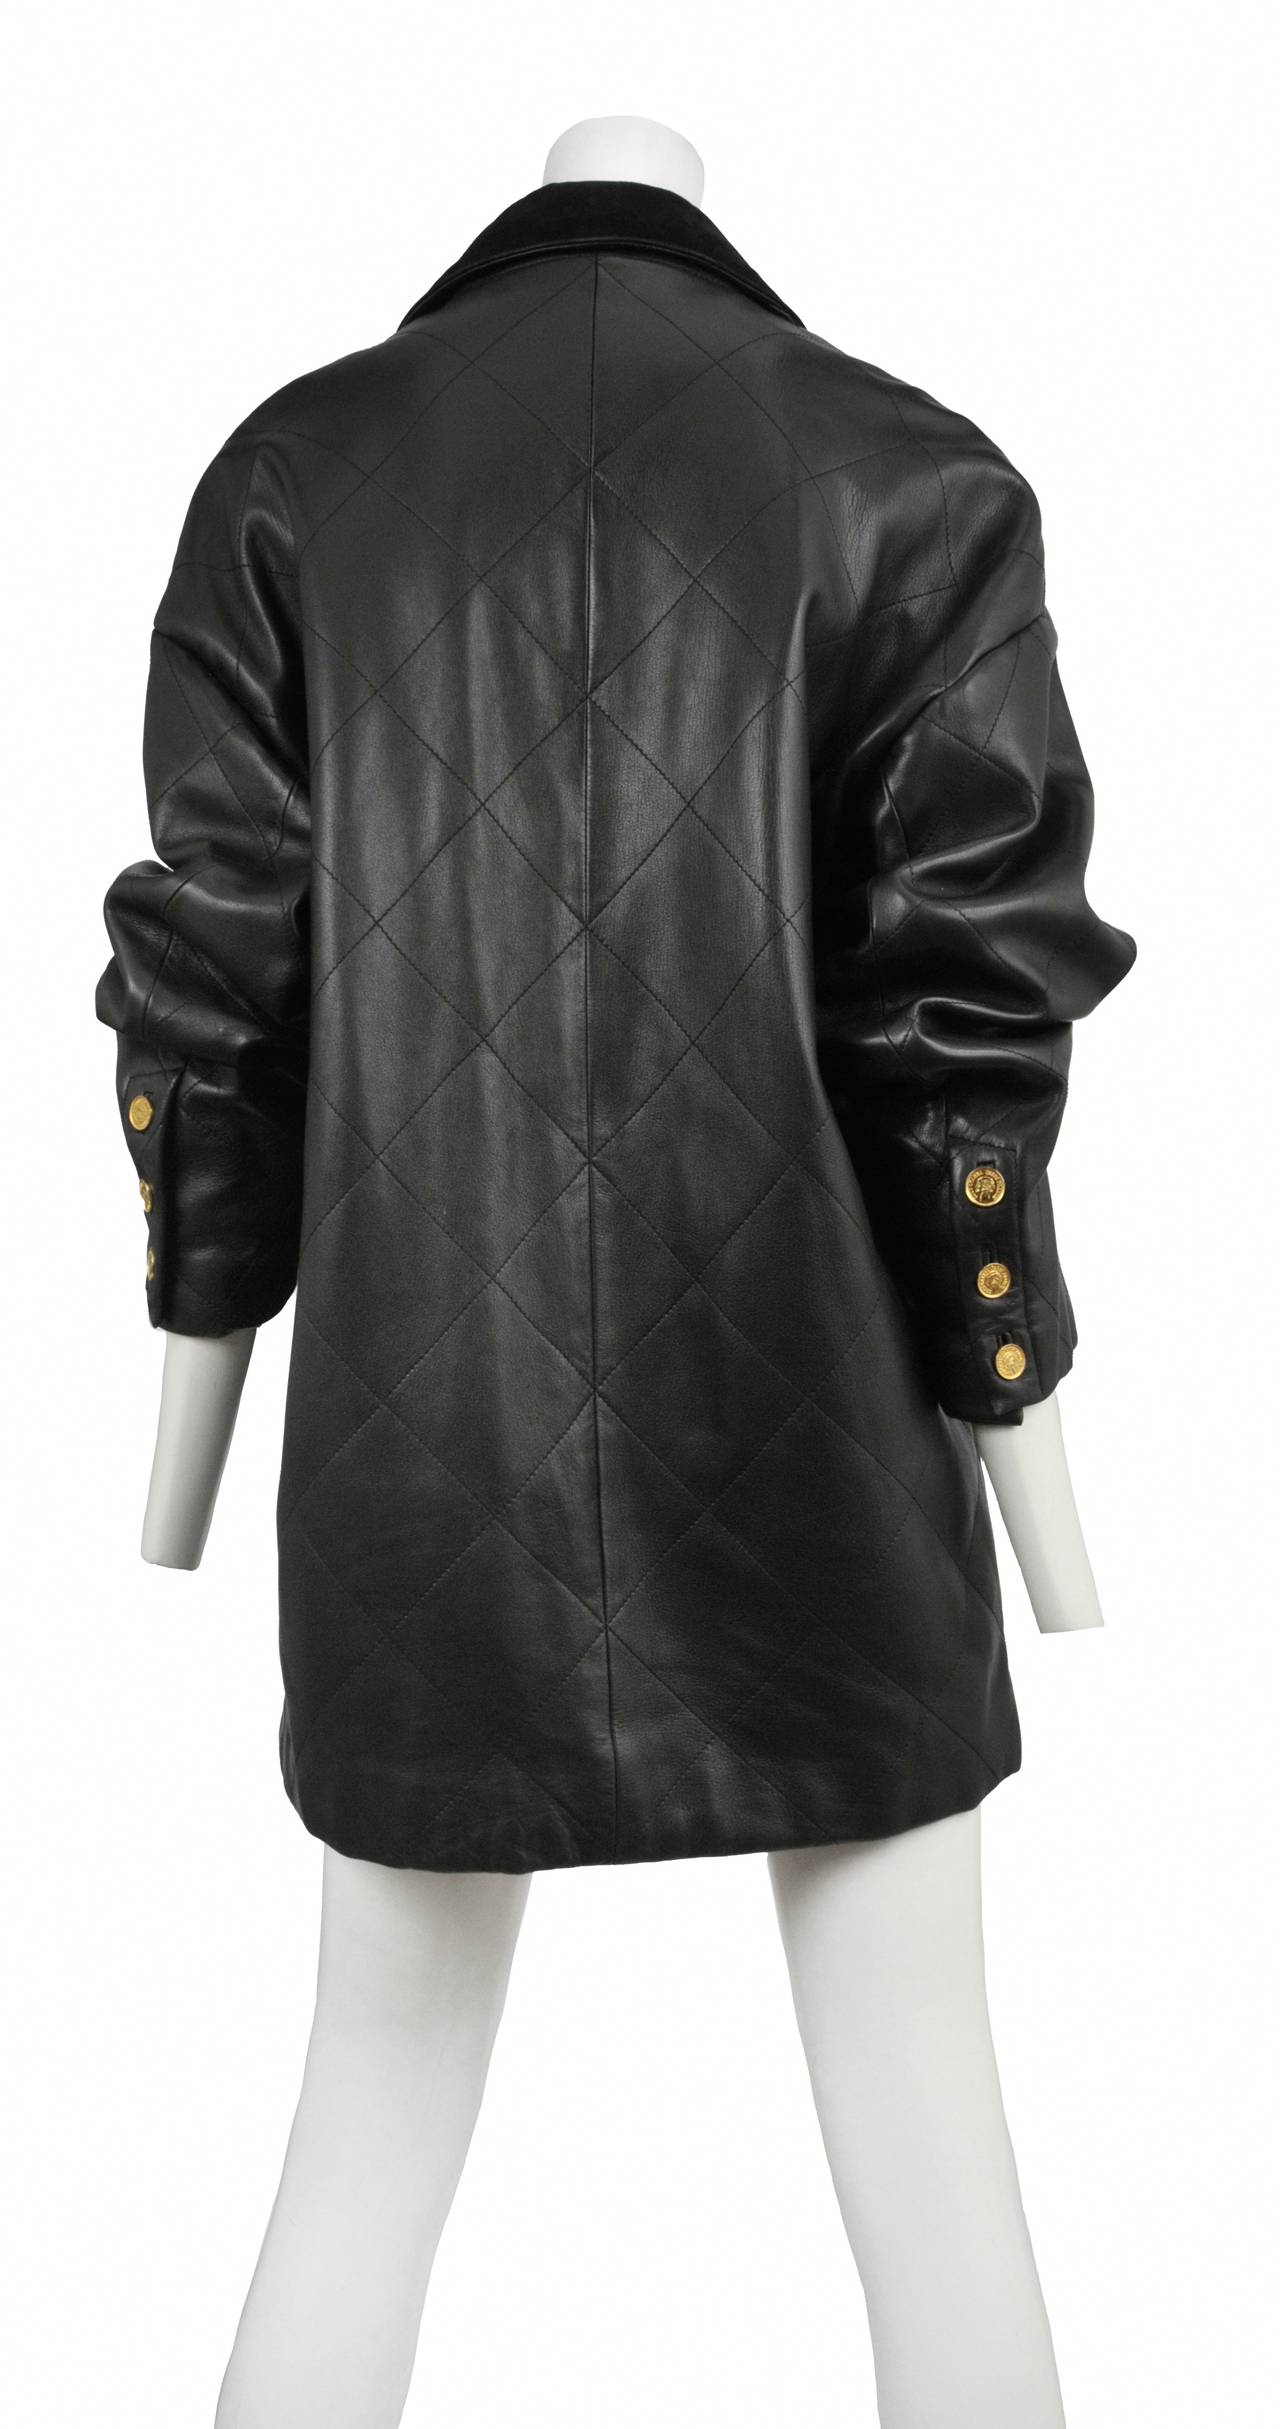 Vintage Chanel quilted black leather oversized blazer style jacket with gold Chanel buttons.